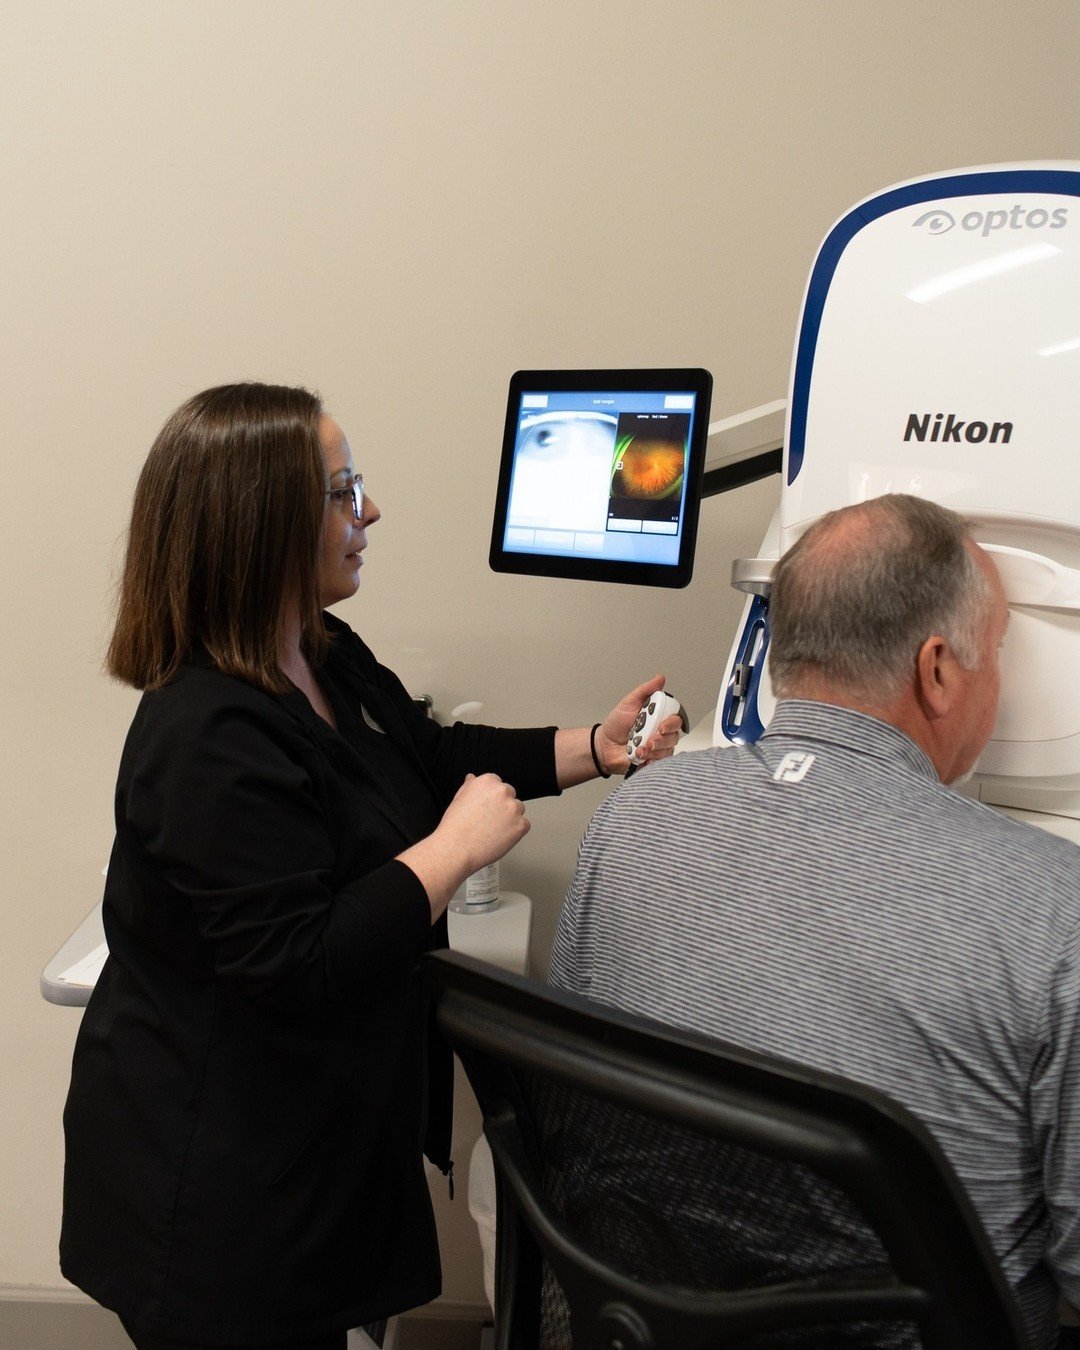 Have you heard about how our team uses the most complete view of the retina to help with early detection of systemic and ocular disease? With our advanced technology, we can provide a comprehensive look at your eye health. Schedule an appointment tod